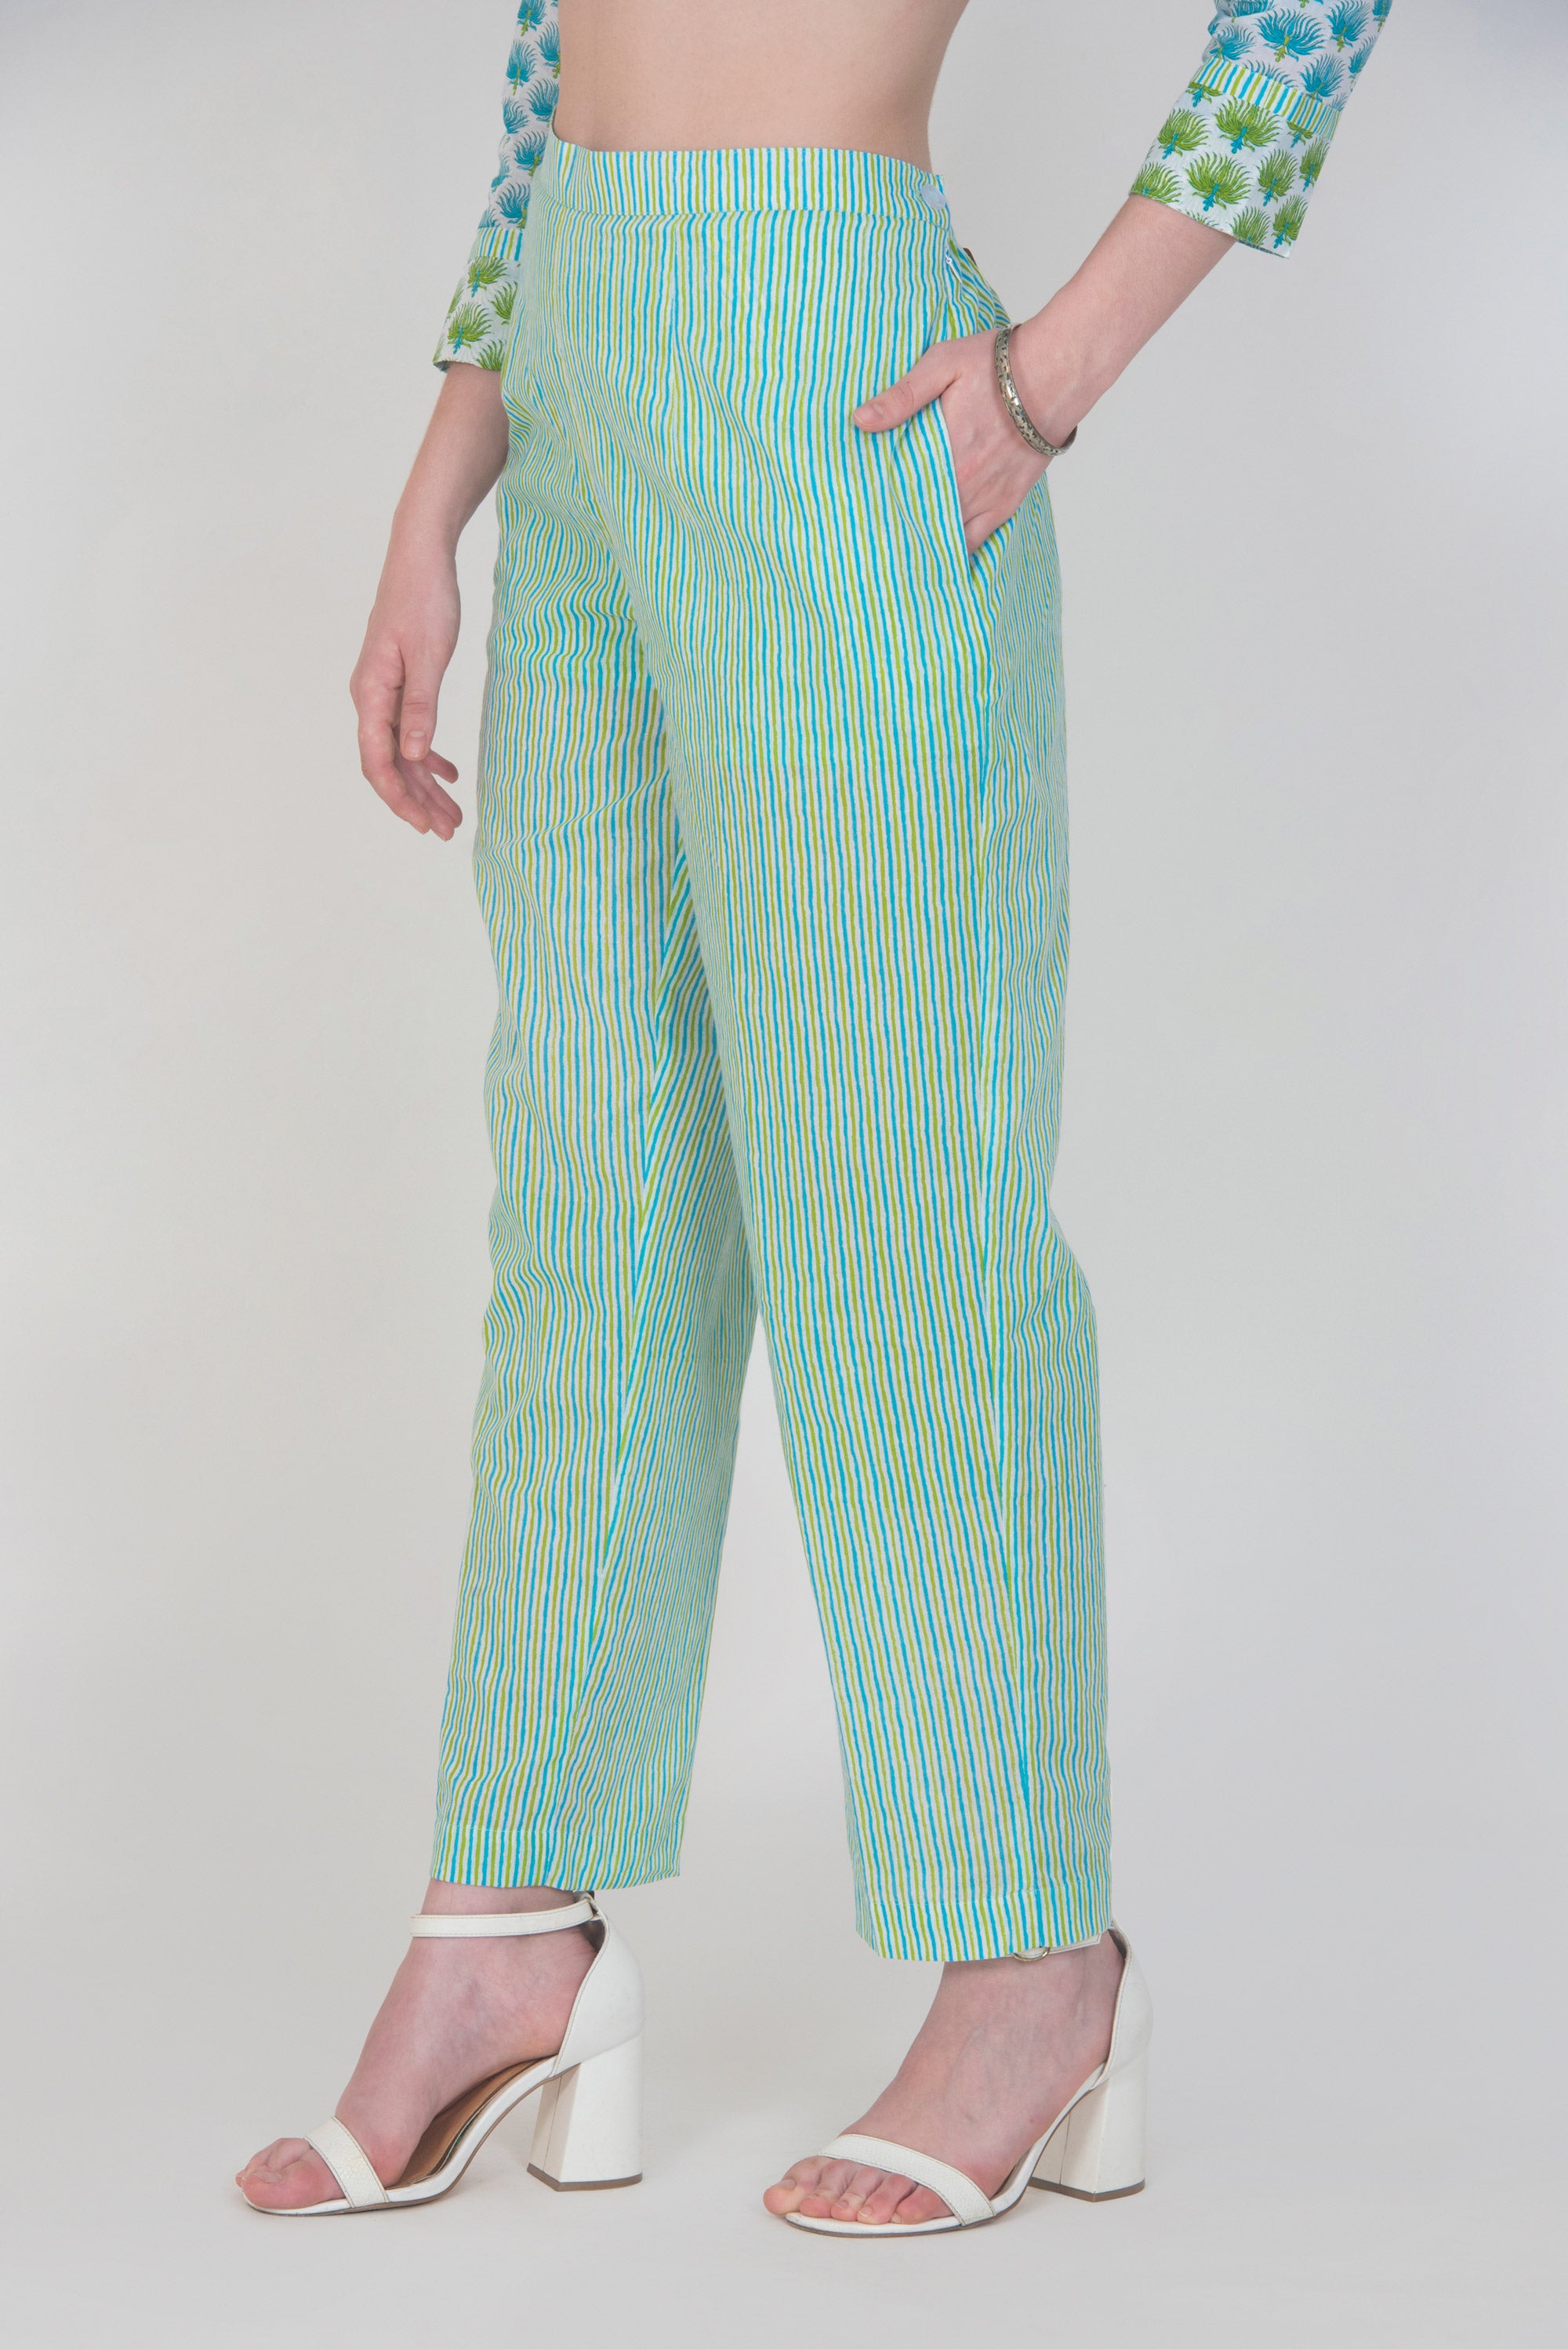 Buy Pink Mid Rise Striped Pants For Women Online in India | VeroModa